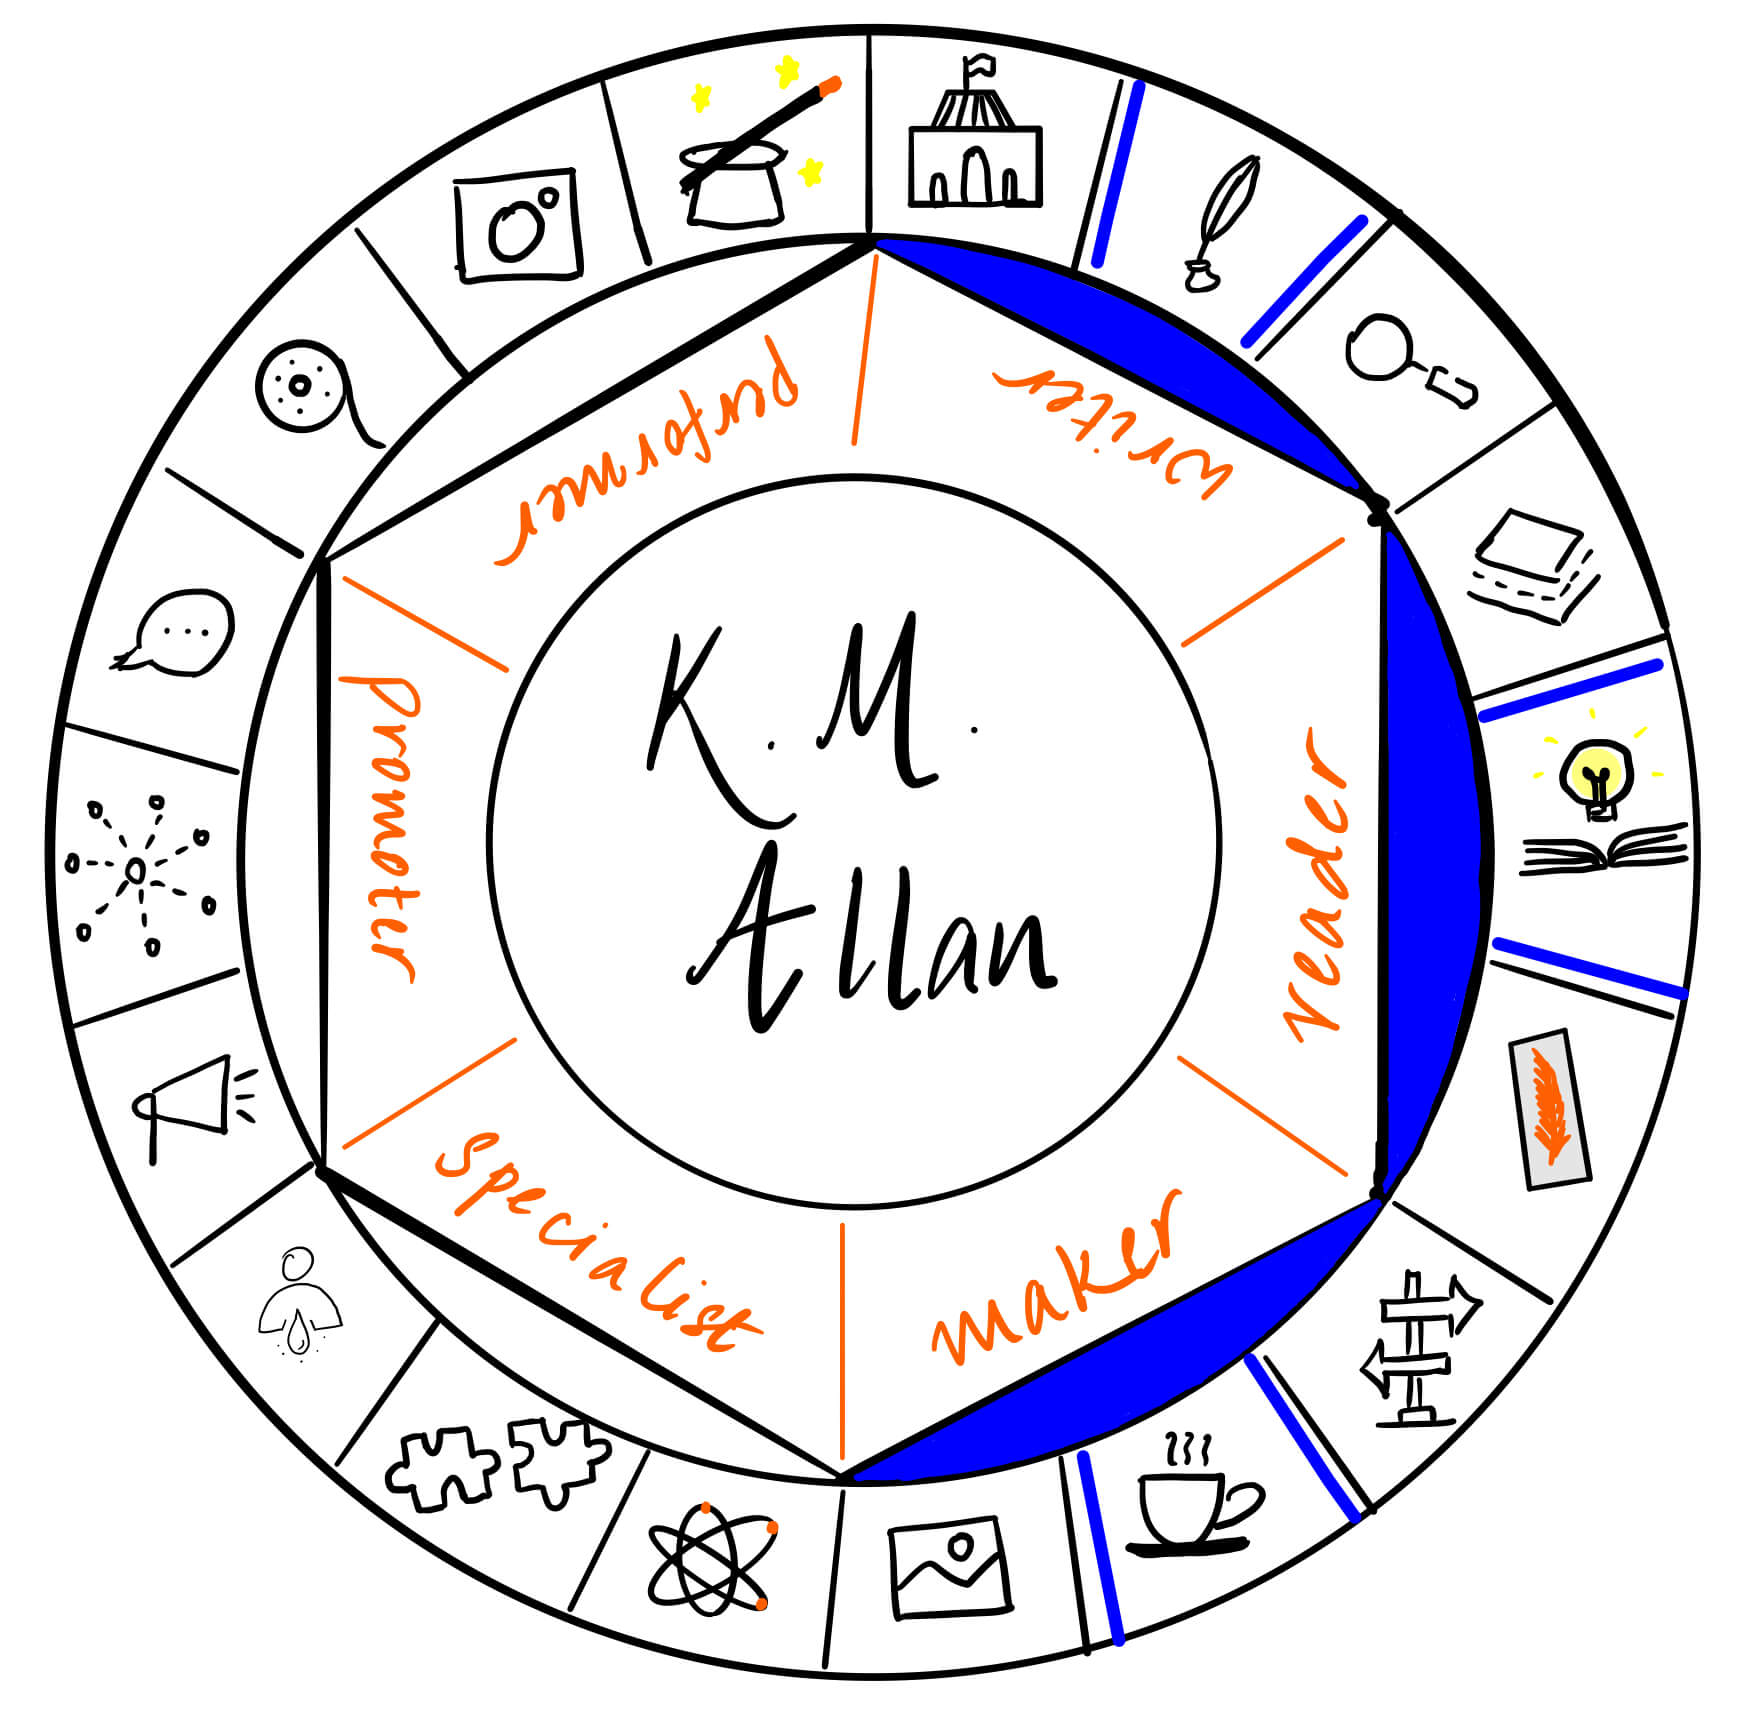 K. M. Allan is a writer, reader and specialist. It's a pleasure to have her over on The Creator's Roulette to talk about rejections in writing and learning from them.